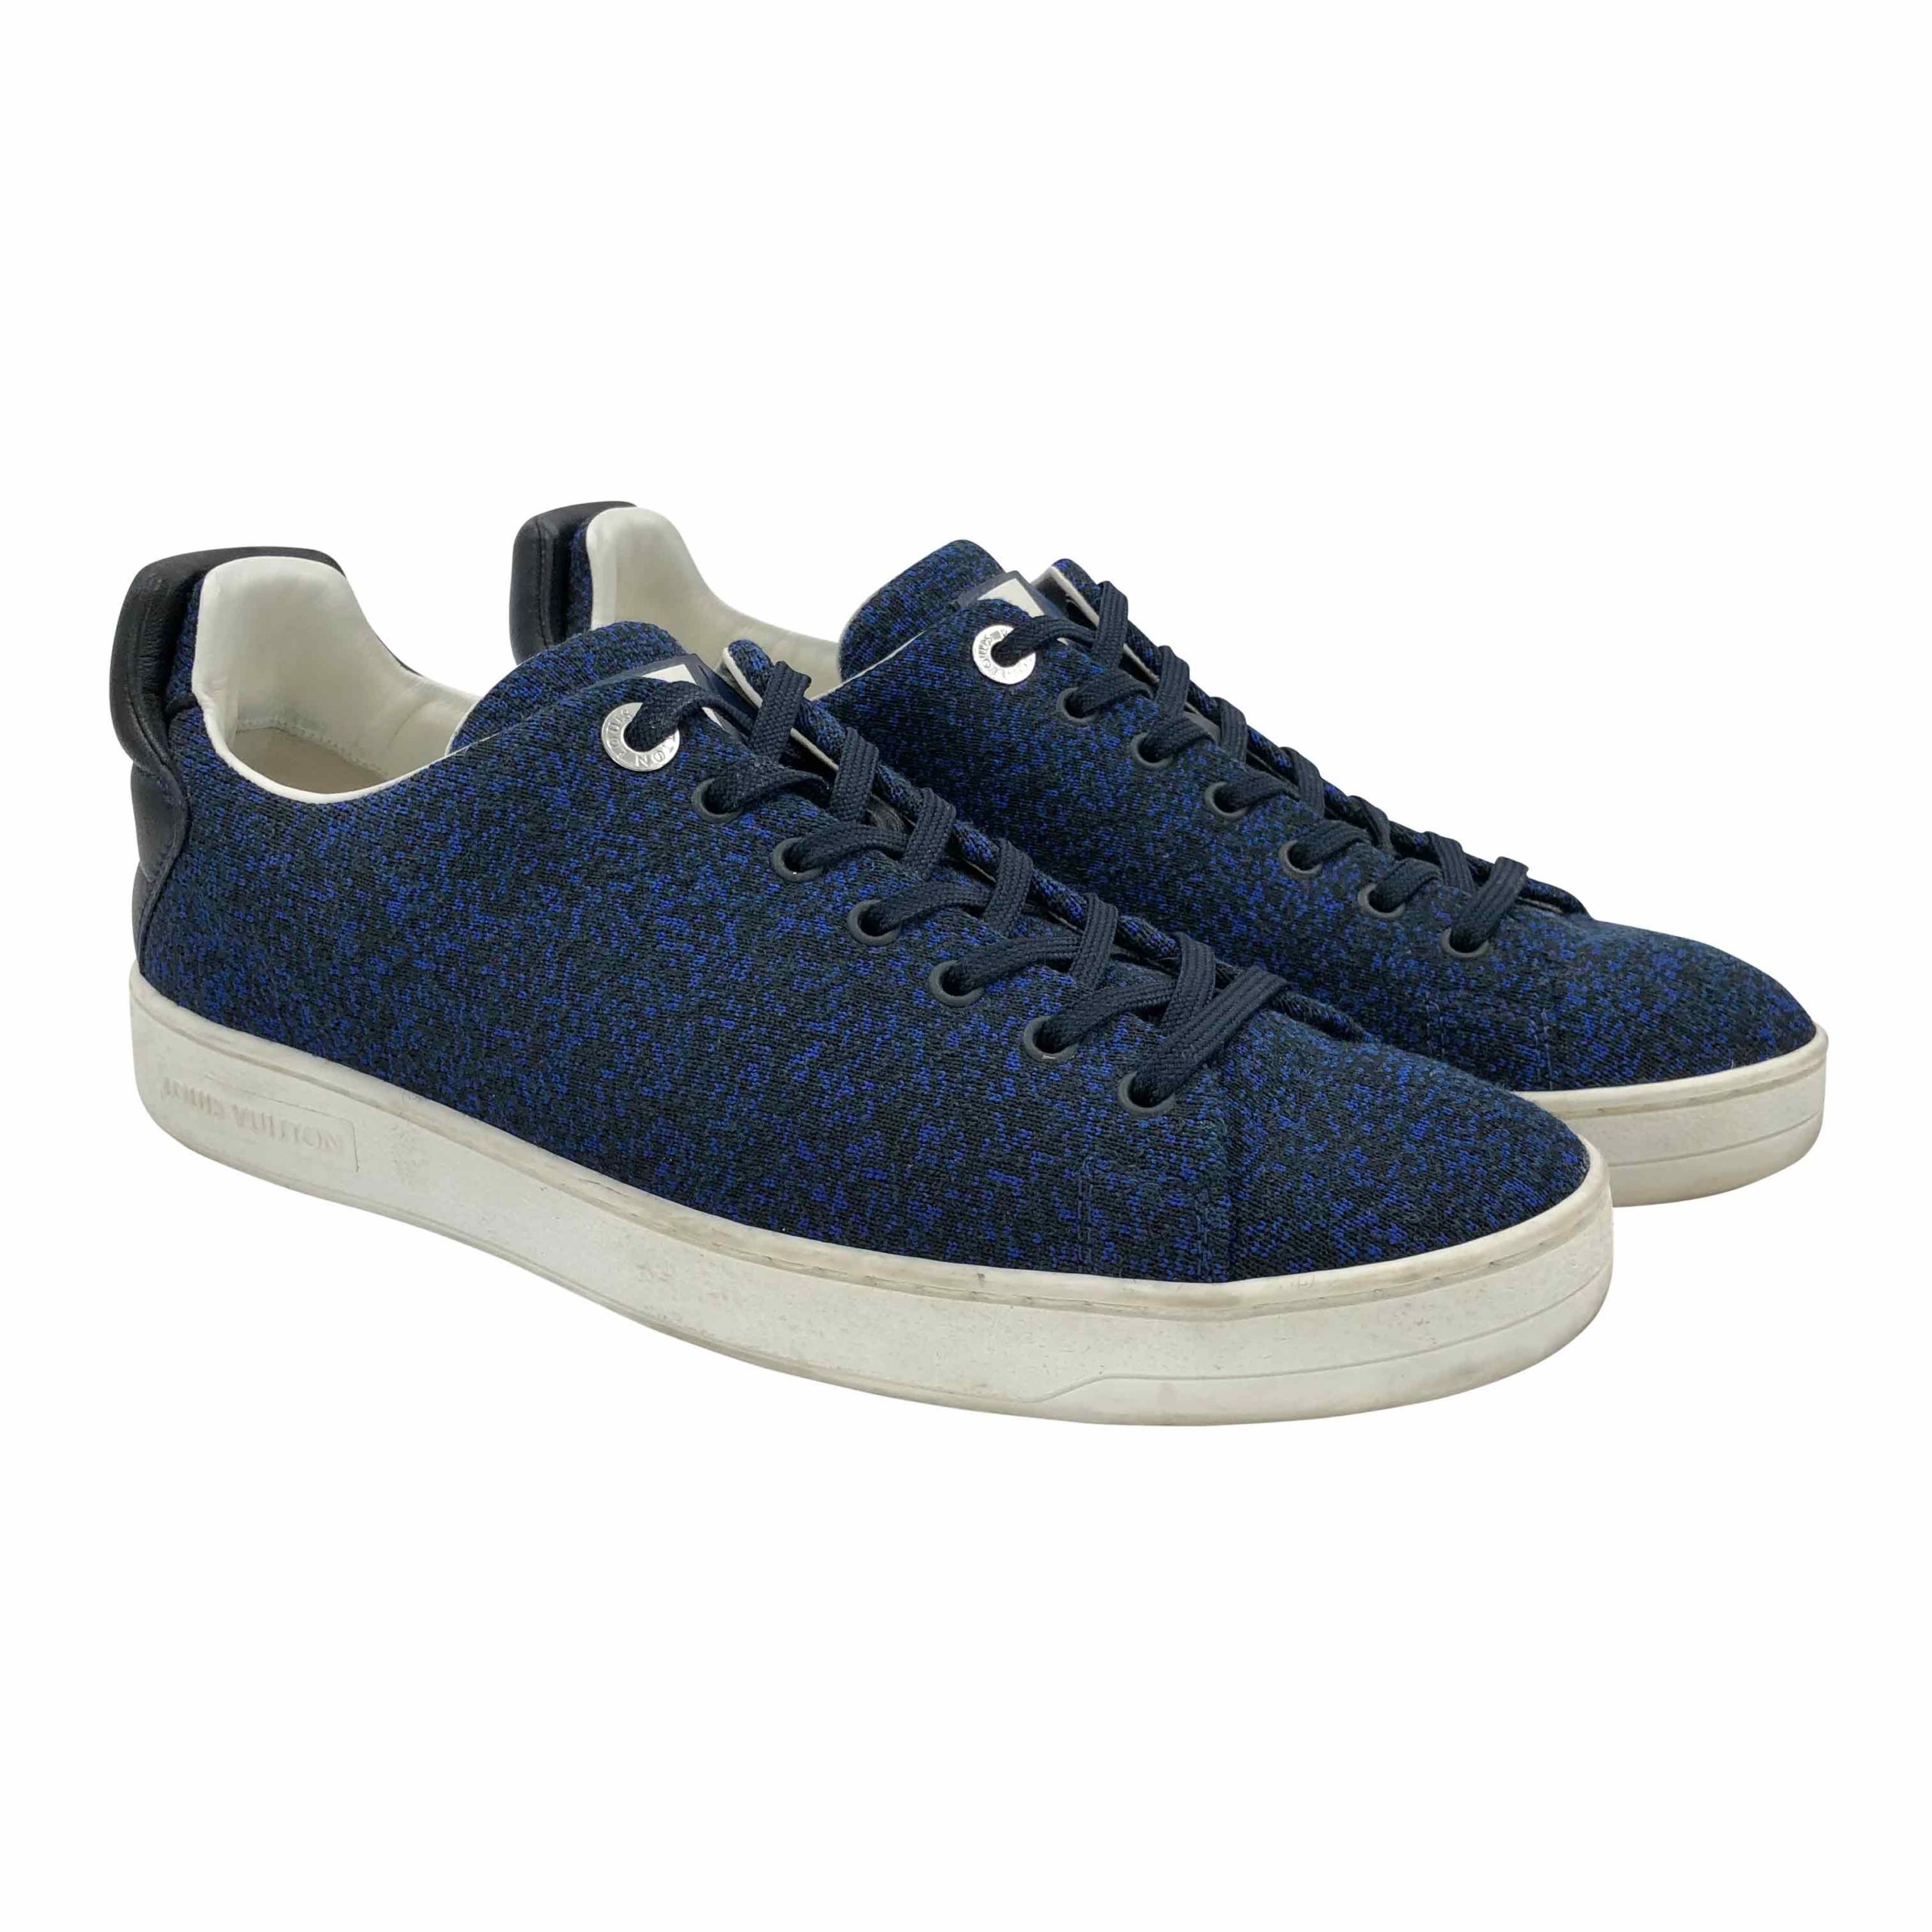 Louis Vuitton sneakers in blue and black canvas - DOWNTOWN UPTOWN Genève